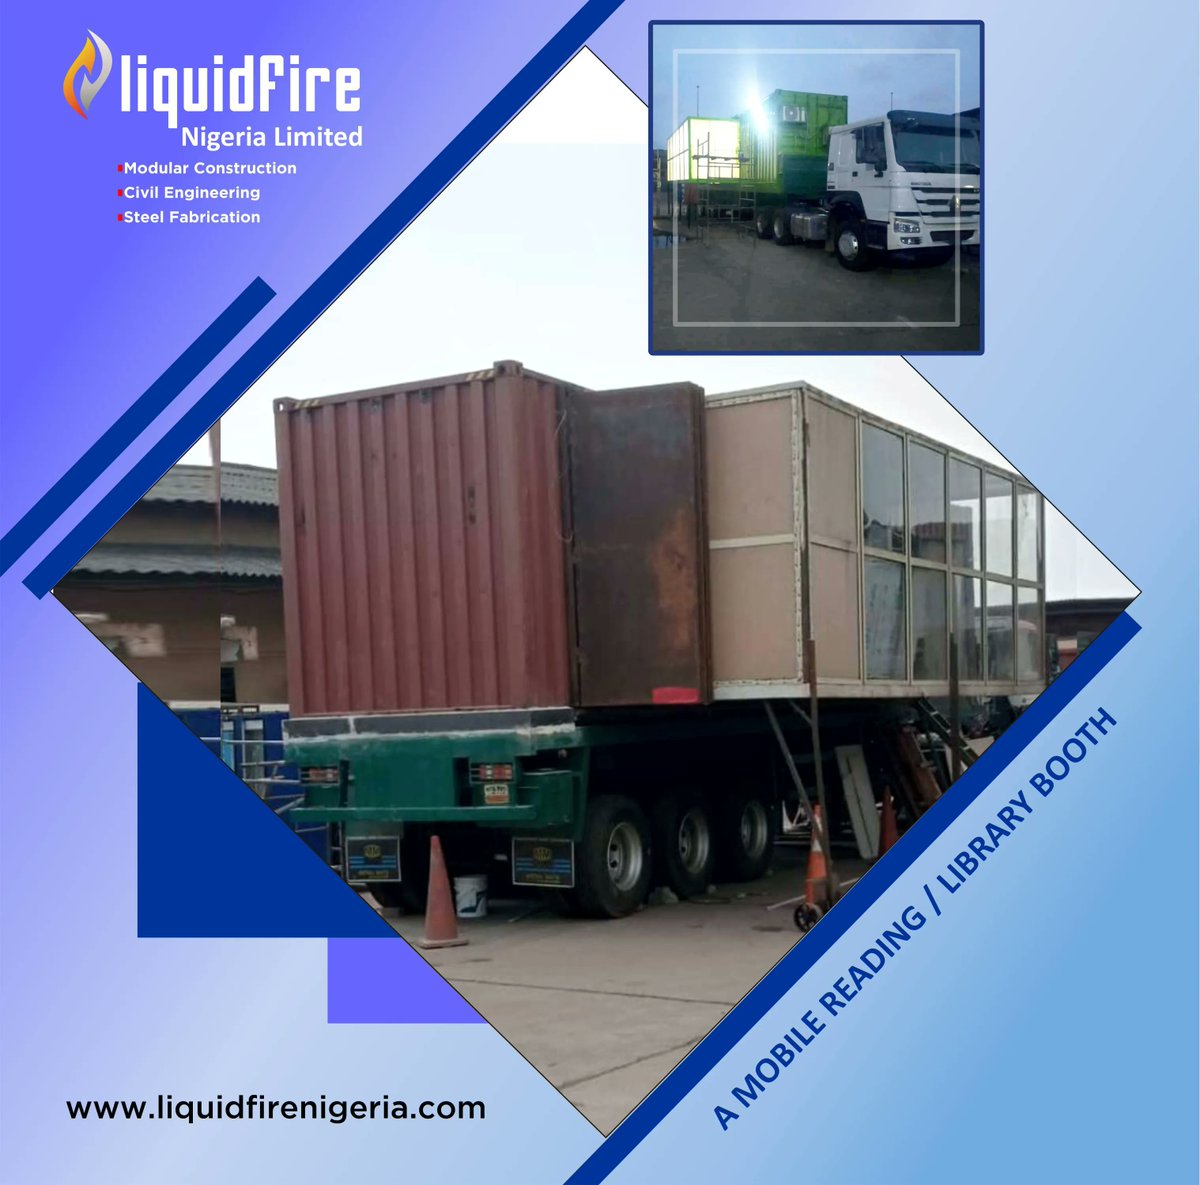 A successful construction of a mobile reading / library booth for our client 👍📚 

Partner with us today for your portable and/or custom-built building solutions, we are here to exceed your expectations!
#ModularSolutions #SustainableConstruction #EngineeringExcellence